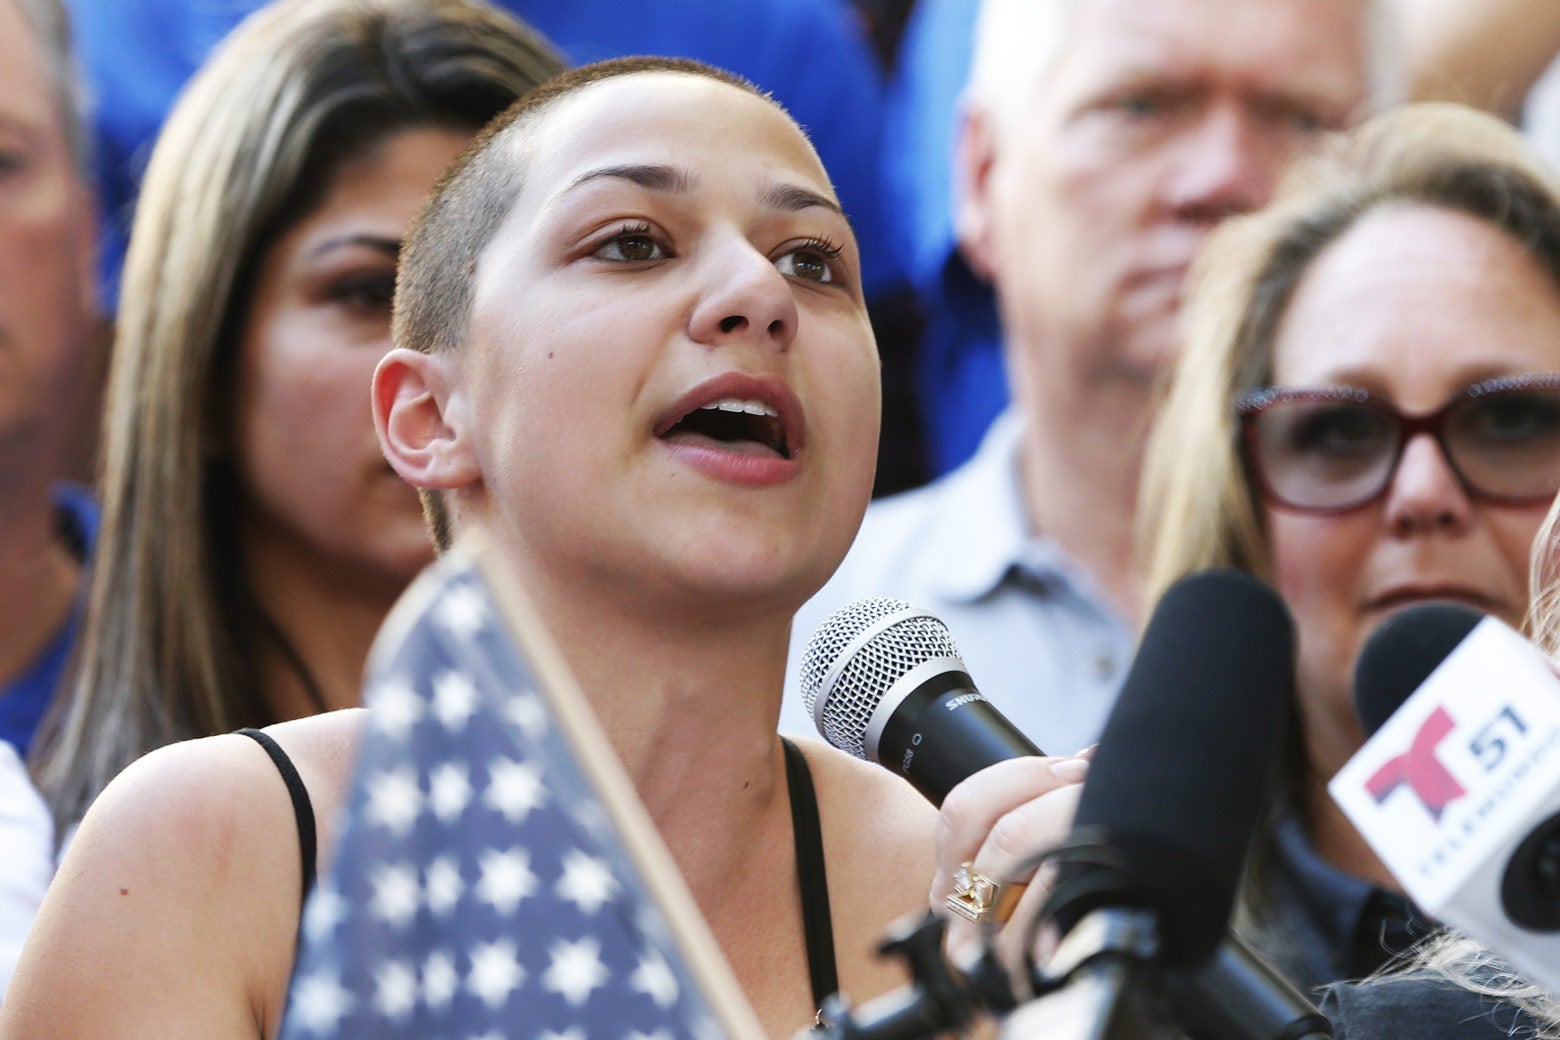 Marjory Stoneman Douglas High School student Emma Gonzalez speaks at a rally for gun control at the Broward County Federal Courthouse in Fort Lauderdale, Florida, on Saturday.